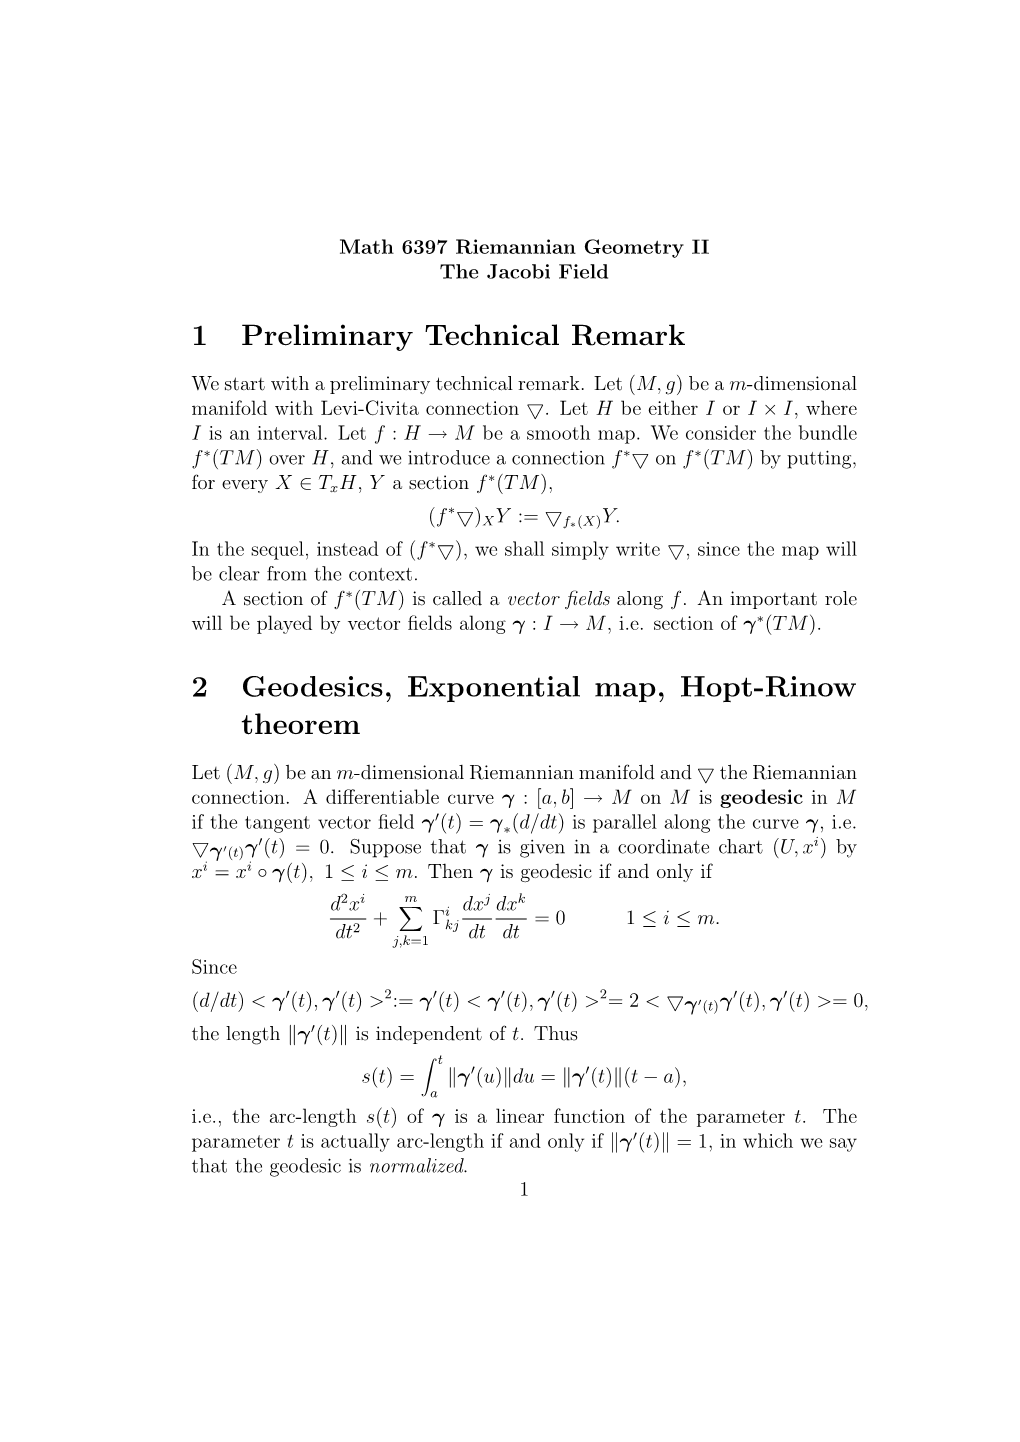 1 Preliminary Technical Remark 2 Geodesics, Exponential Map, Hopt